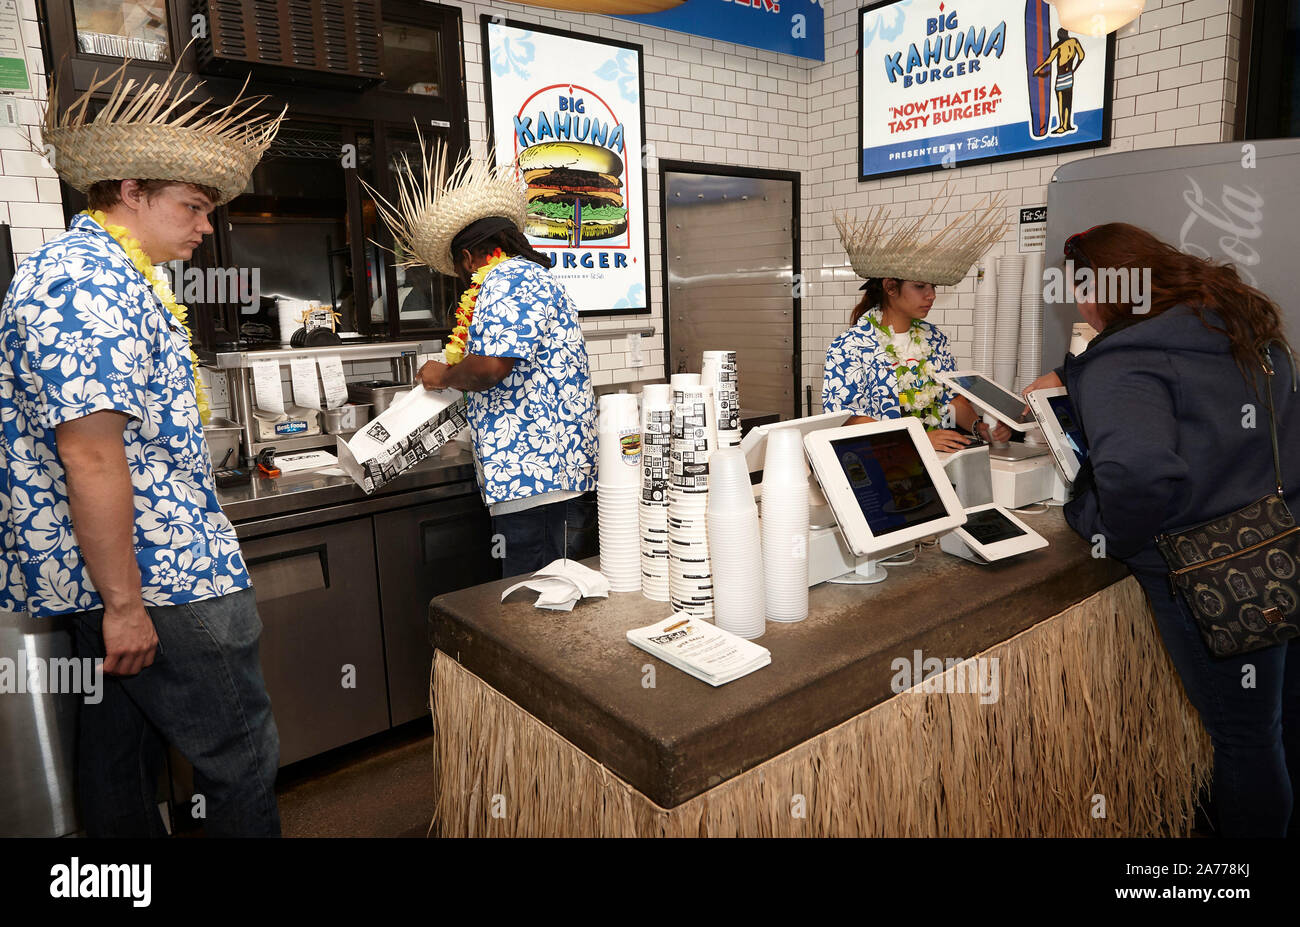 Los Angeles, CA. 30th Oct, 2019. Big Kahuna Burger pop-up on Octorber 30, 2019 in Los Angeles CA. Credit: Cra Sh/Image Space/Media Punch/Alamy Live News Stock Photo